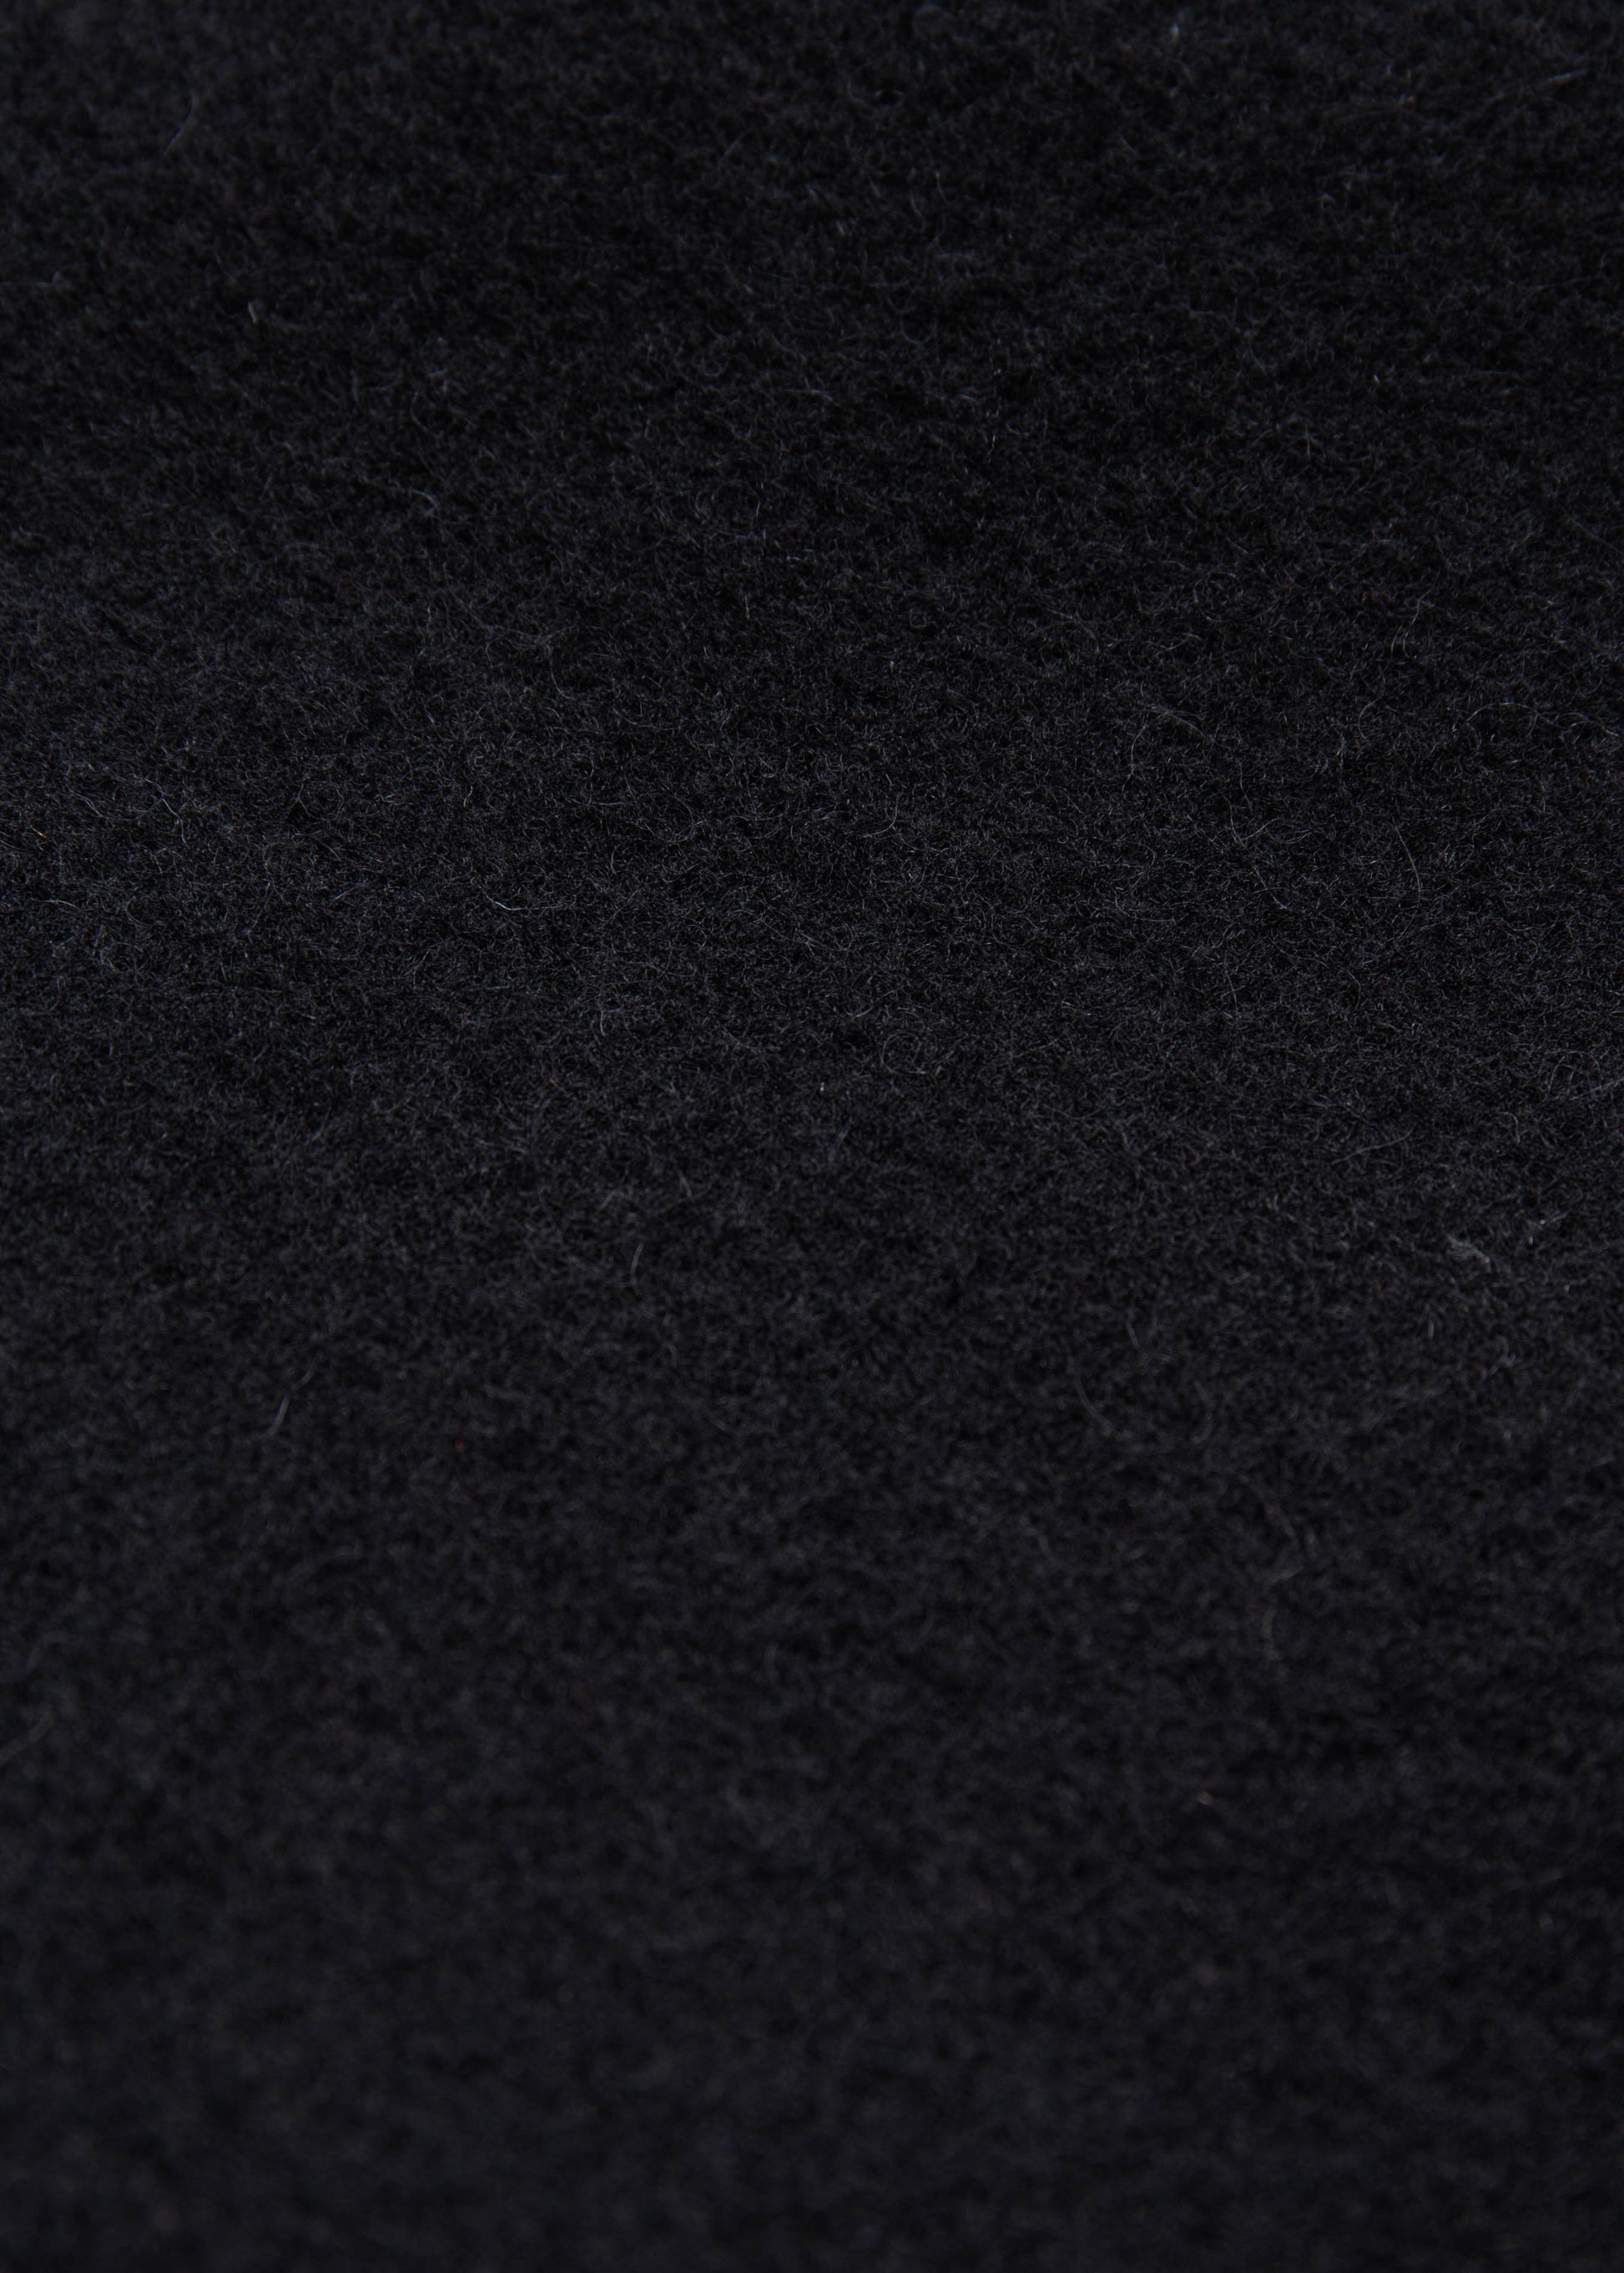 Close up of the black melton wool fabric 